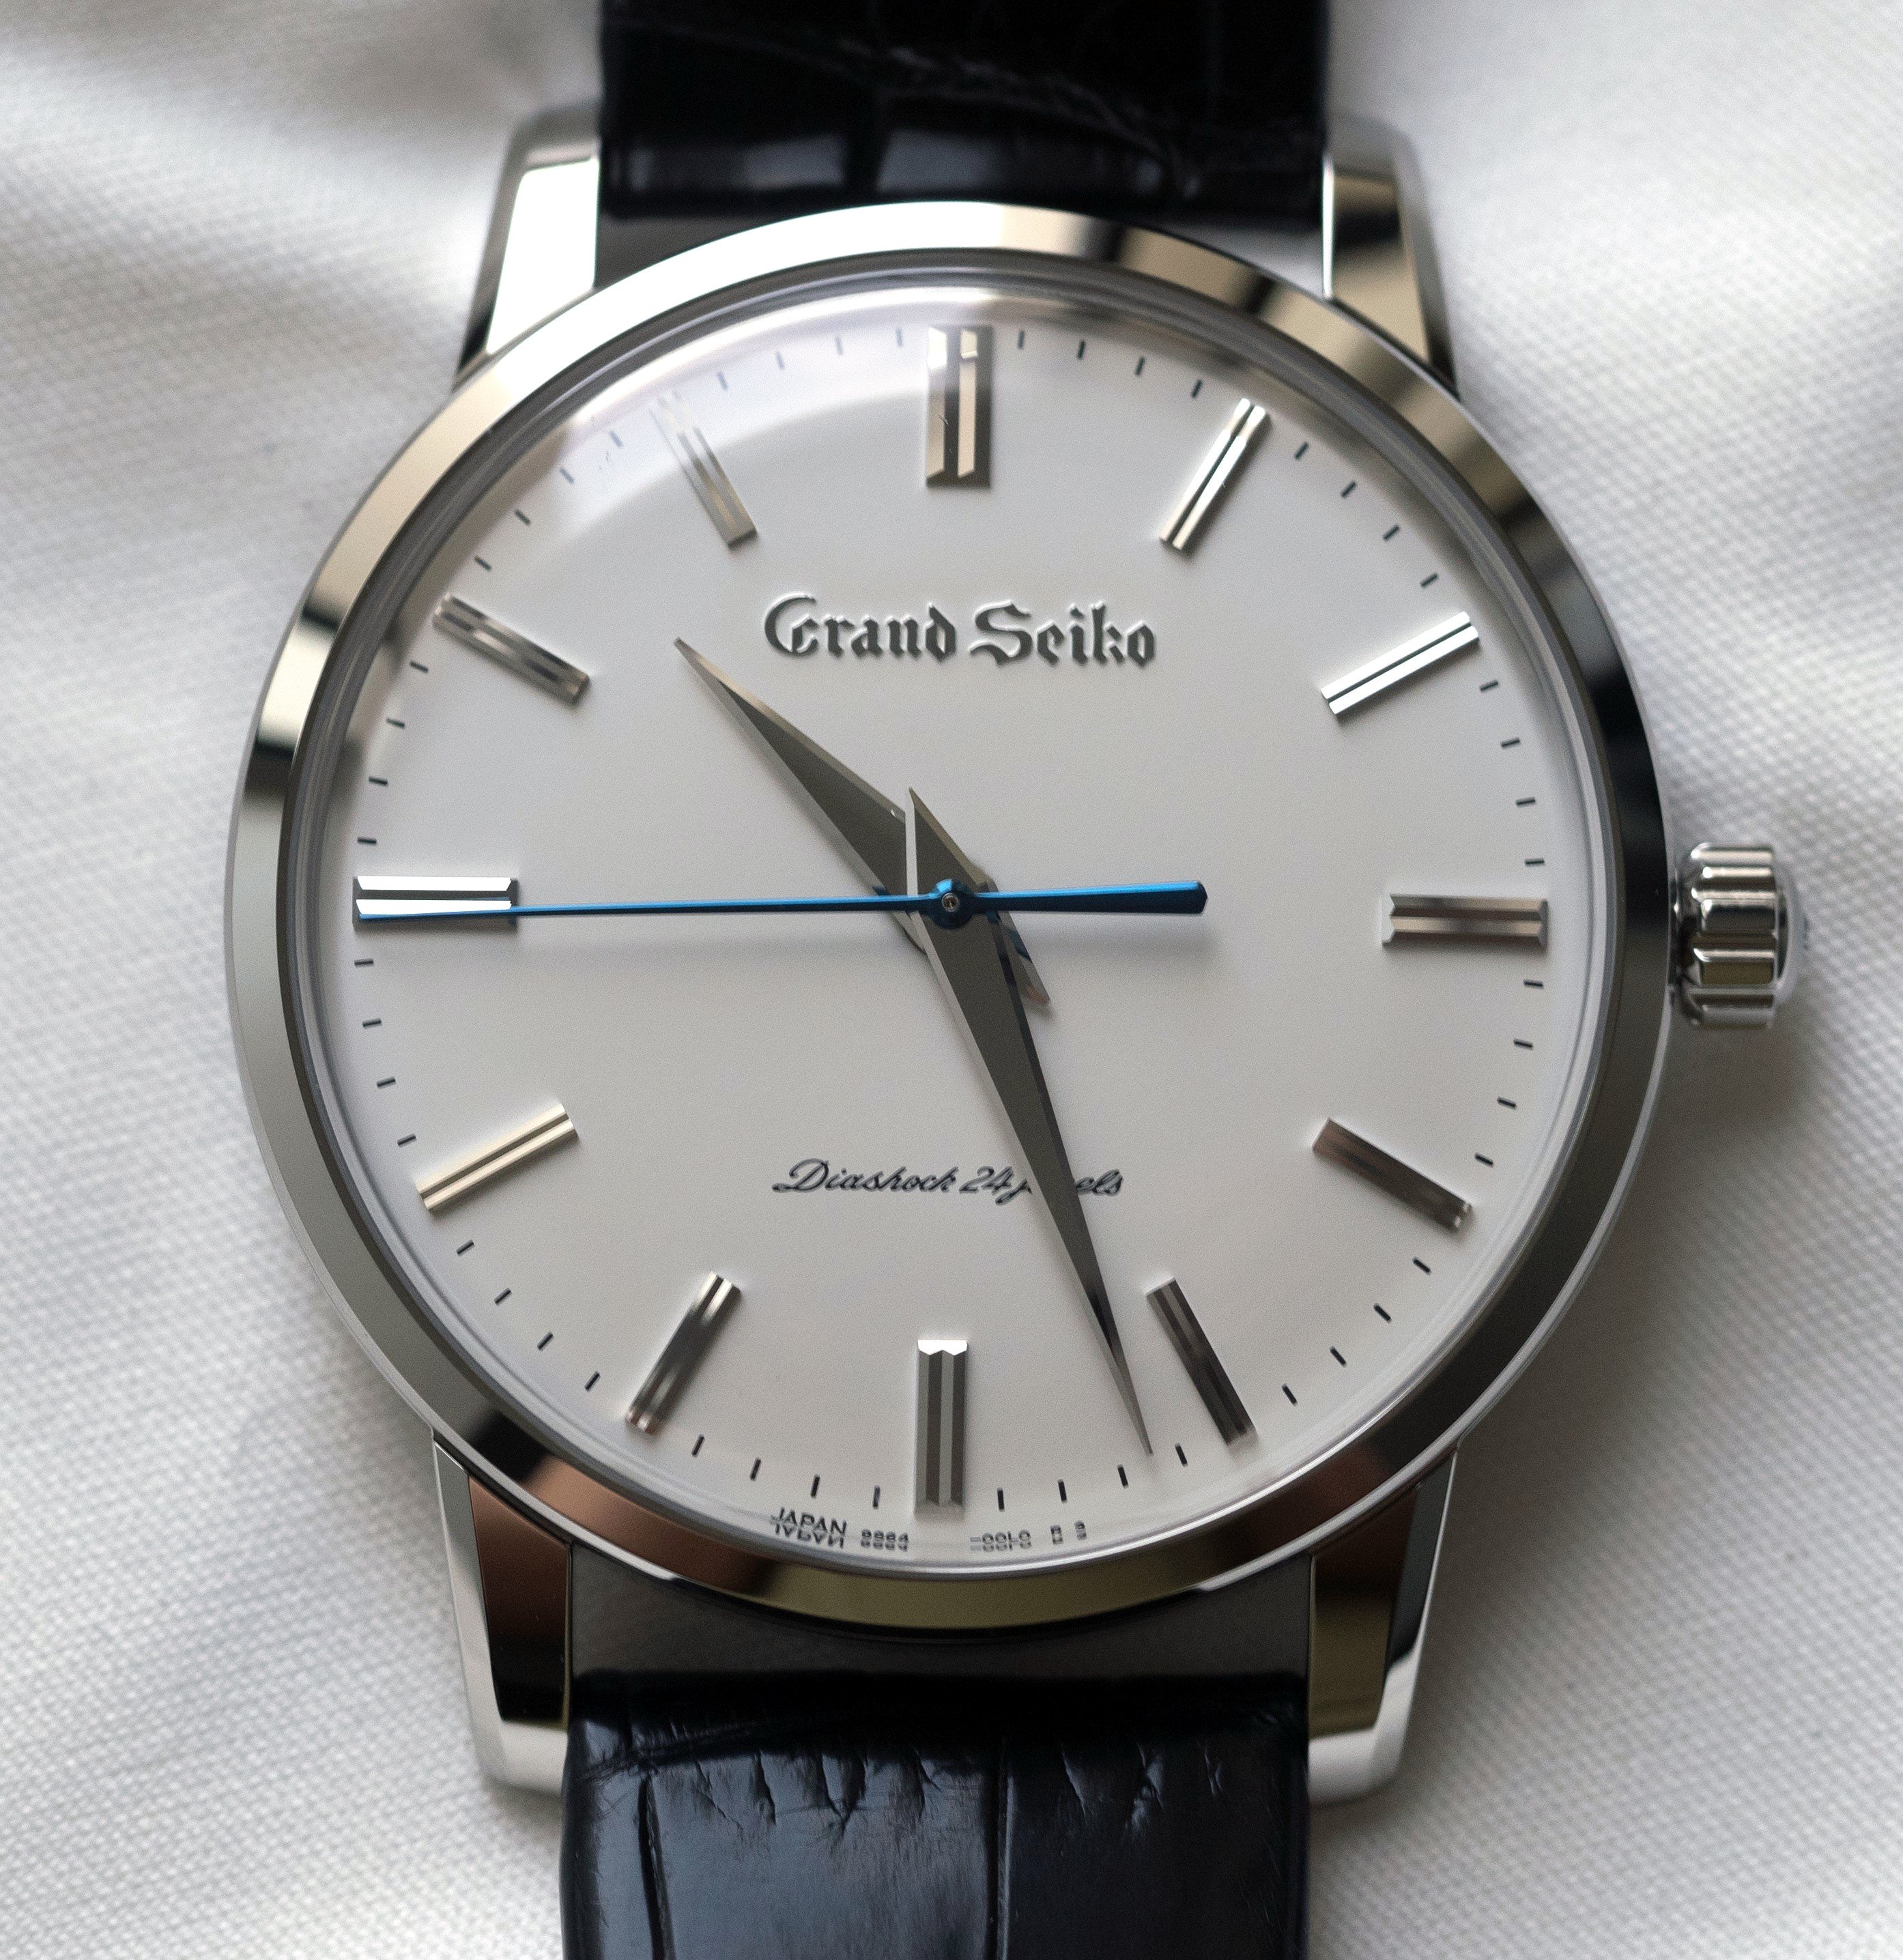 Grand Seiko - The re-creation the first Grand Seiko Limited - SBGW253 |  Luxury brand watches for sale, Monaco, Zurich, Dubai, Hong Kong